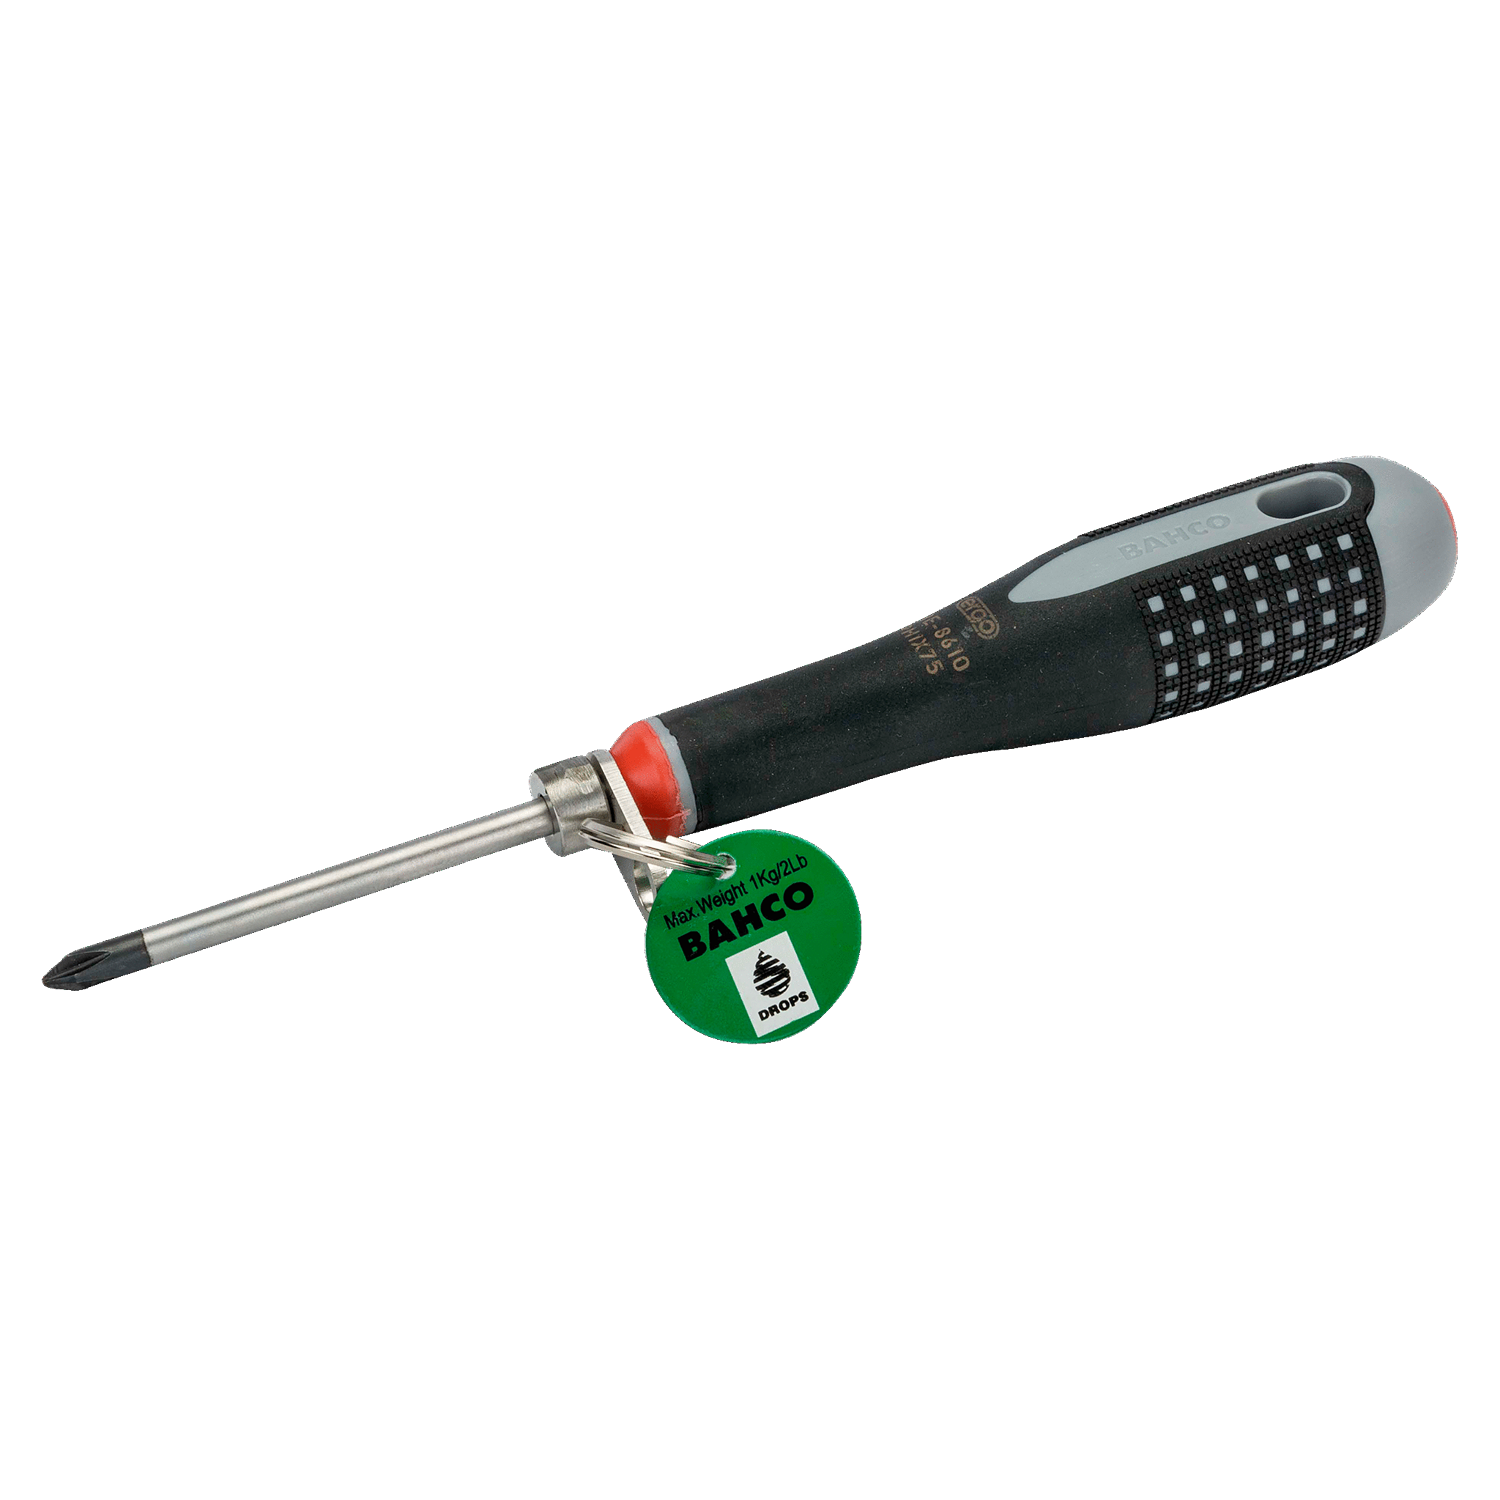 BAHCO TAHBE8610-TAHBE8624 ERGO Phillips Screwdriver Head Screws - Premium Phillips Screwdriver from BAHCO - Shop now at Yew Aik.